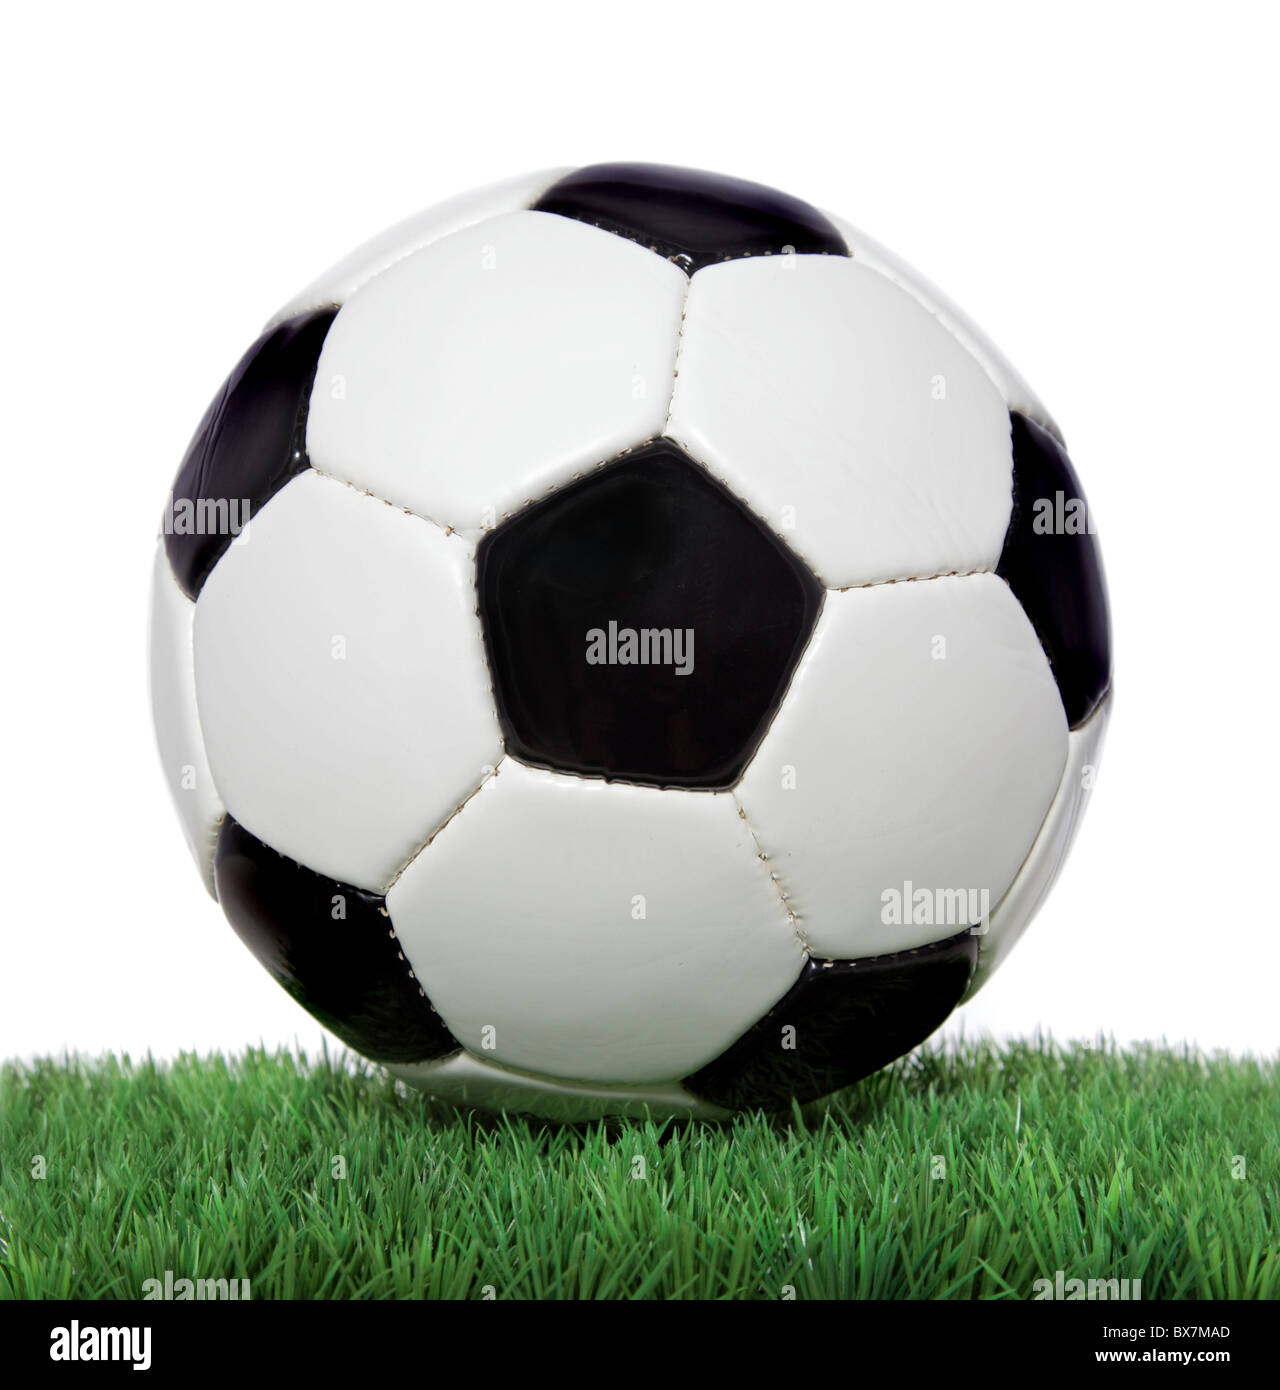 Soccer ball on green grass. All on white background. Stock Photo